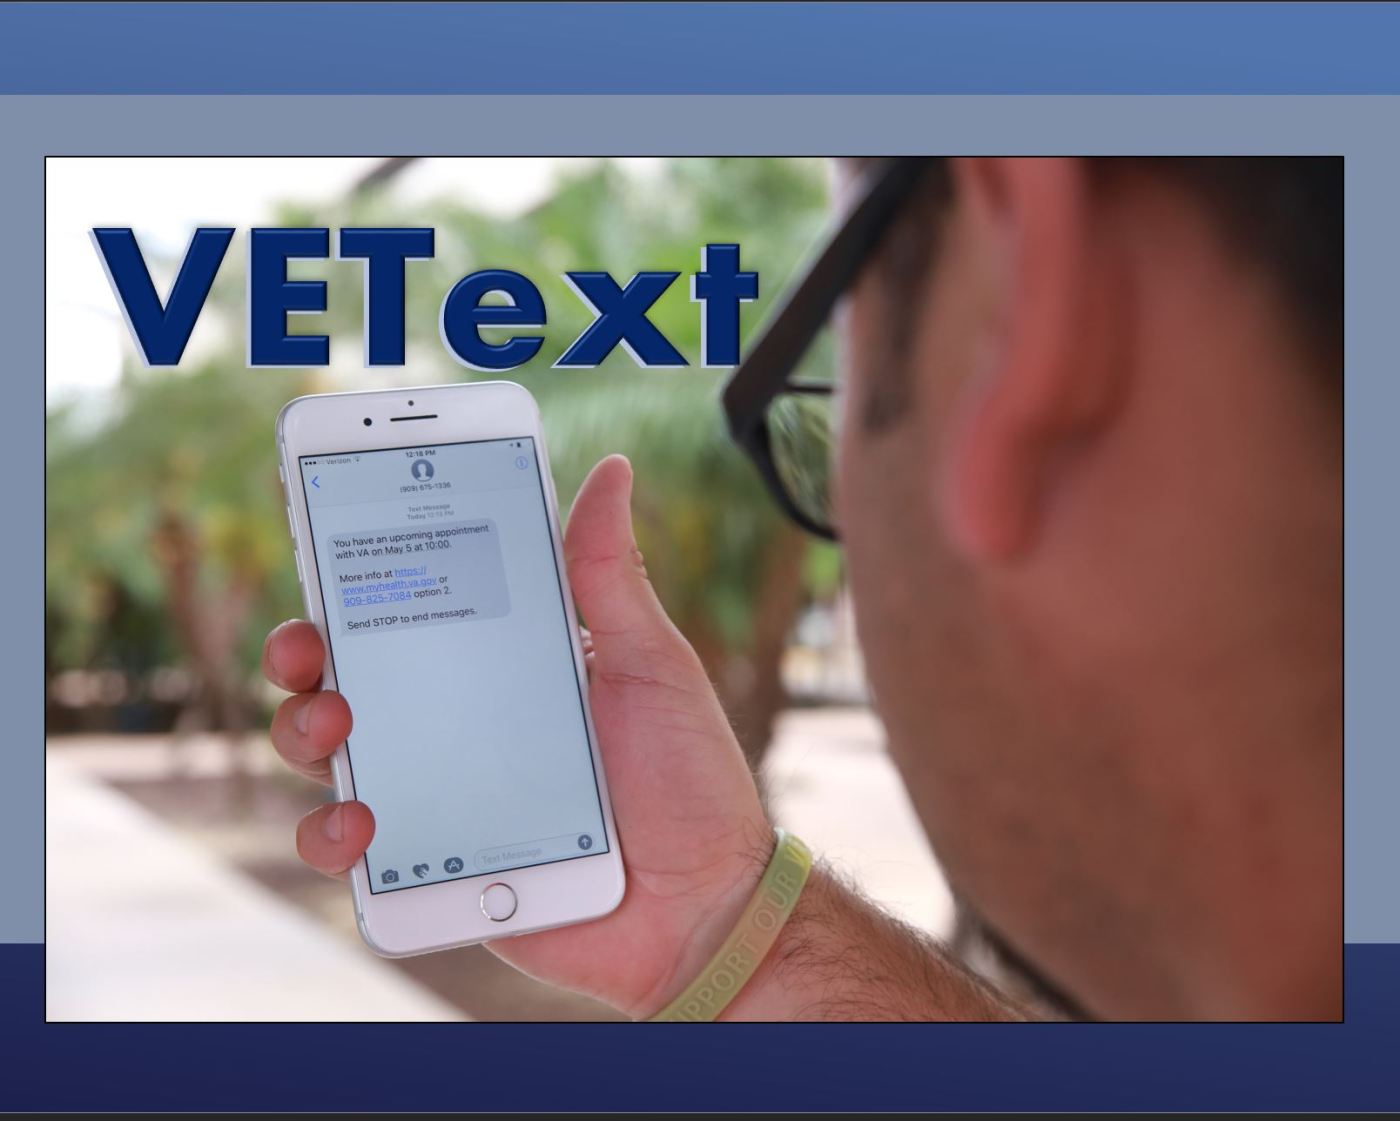 Using VEText, a local Veteran looks at the screen of a smart phone to read a recent text received April 30, 2018. (U.S. Department of Veterans Affairs photo illustration by Reynaldo Leal)